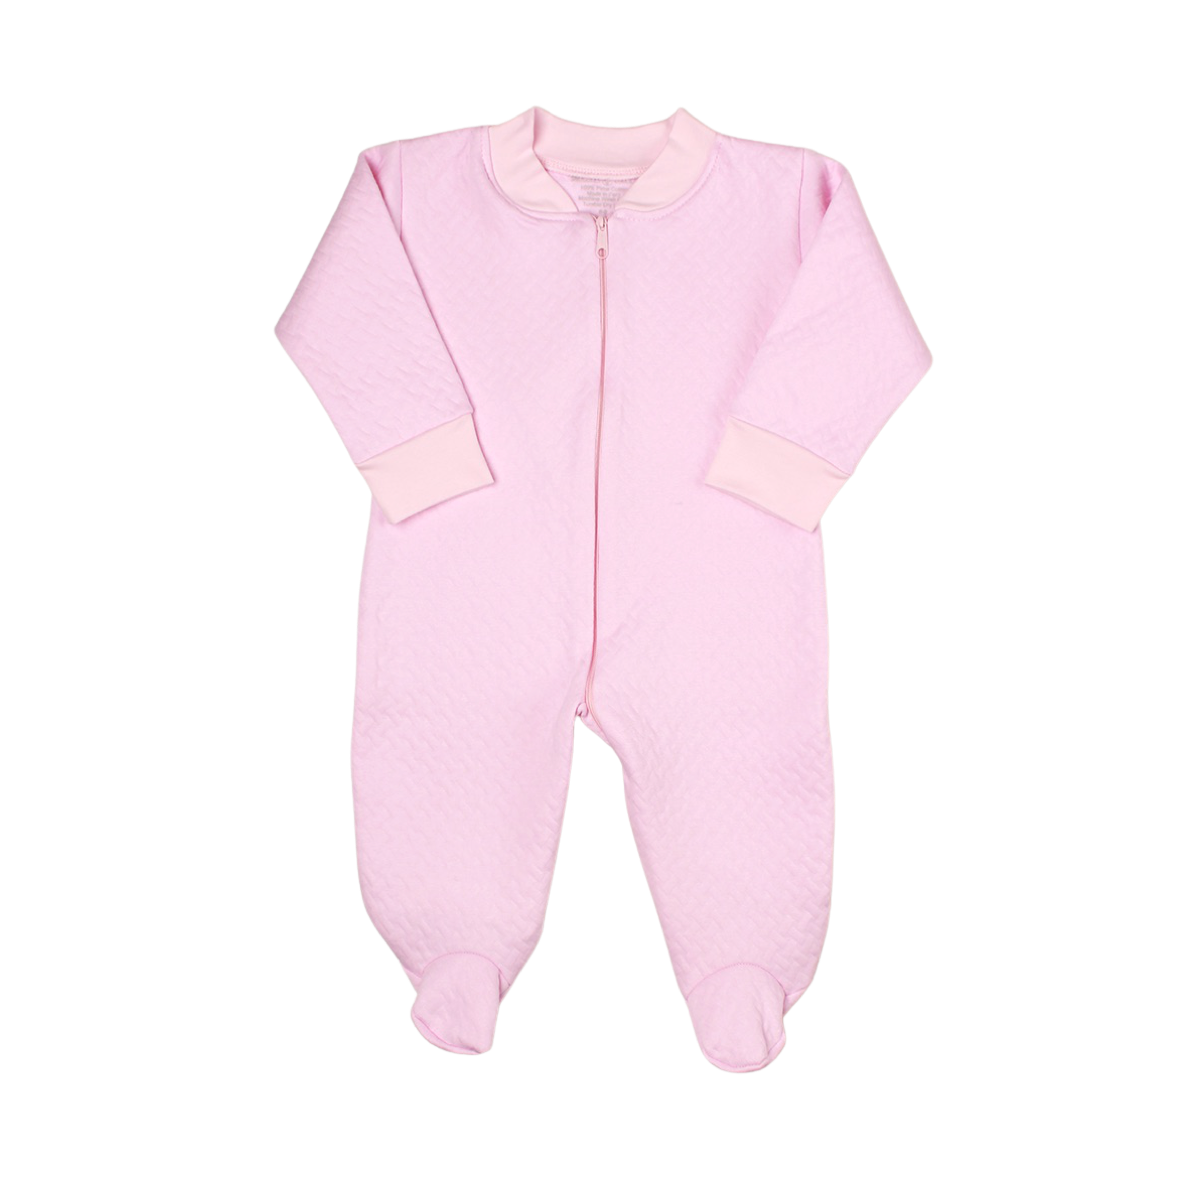 Sleep and Play Zipper Footie in Jacquard Cotton - Pink